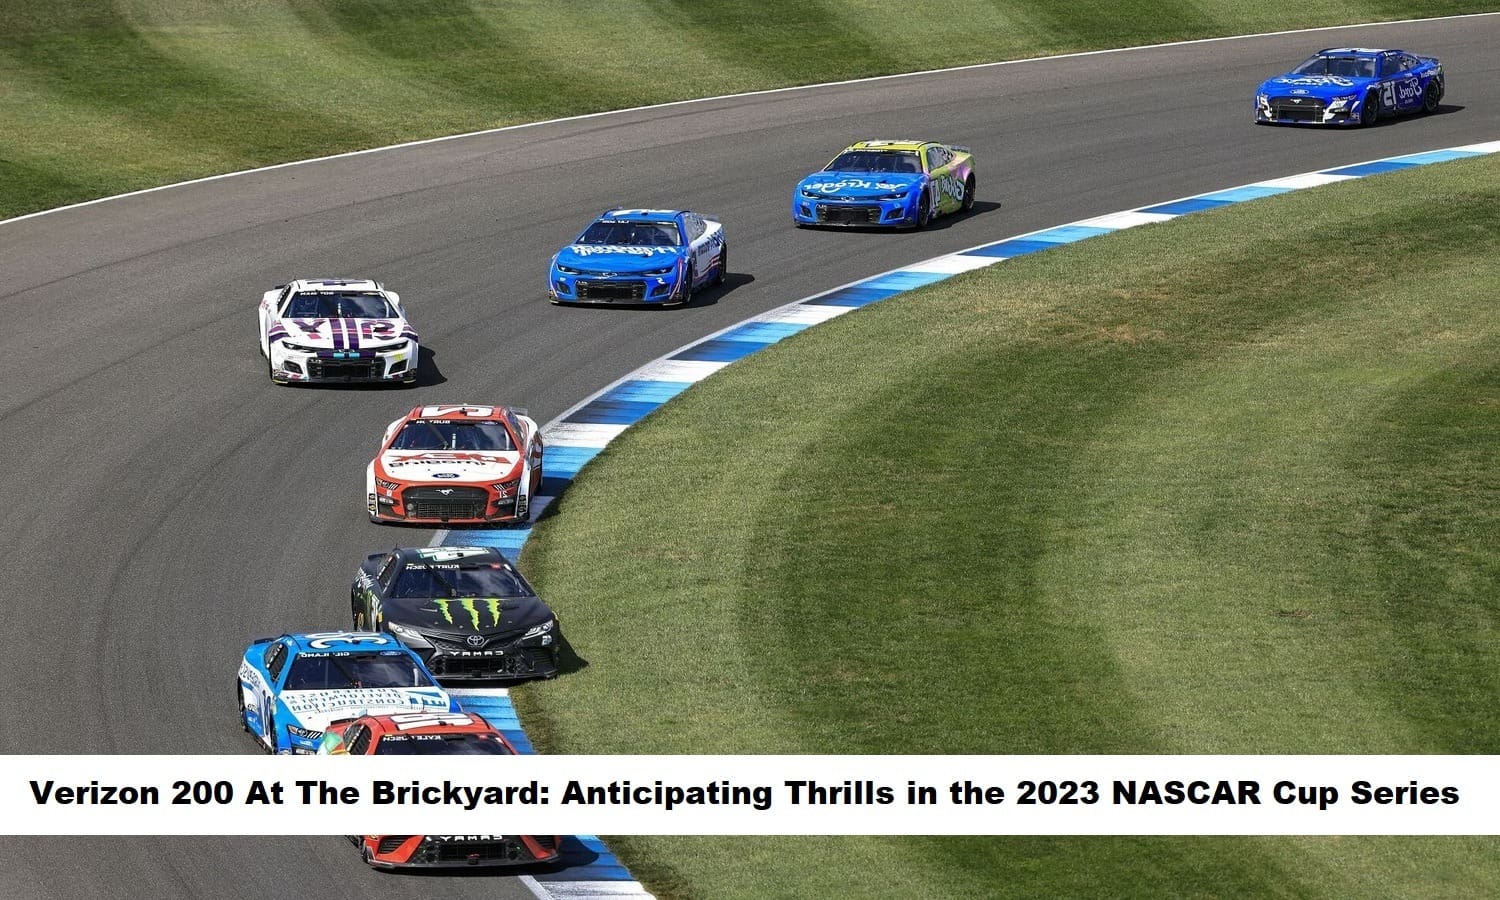 verizon-200-at-the-brickyard-anticipating-thrills-in-the-2023-nascar-cup-serie